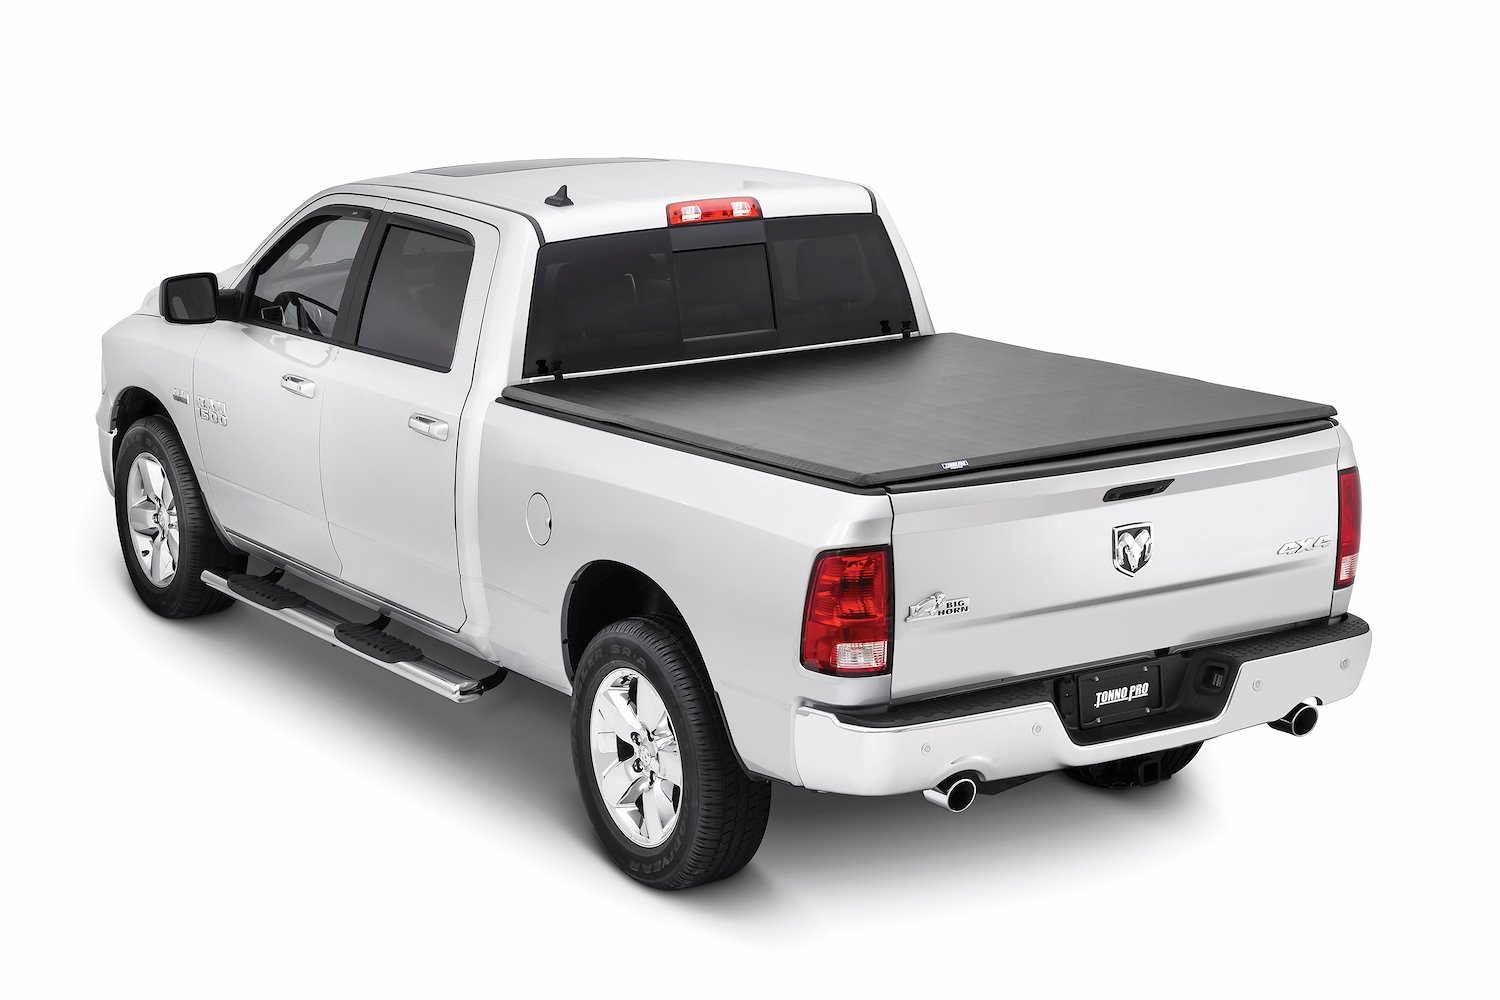 Lo-Roll Roll-Up Tonneau Cover 2009-2018 Dodge Ram 1500, Select Dodge Ram Classic [5.7 ft. Bed]